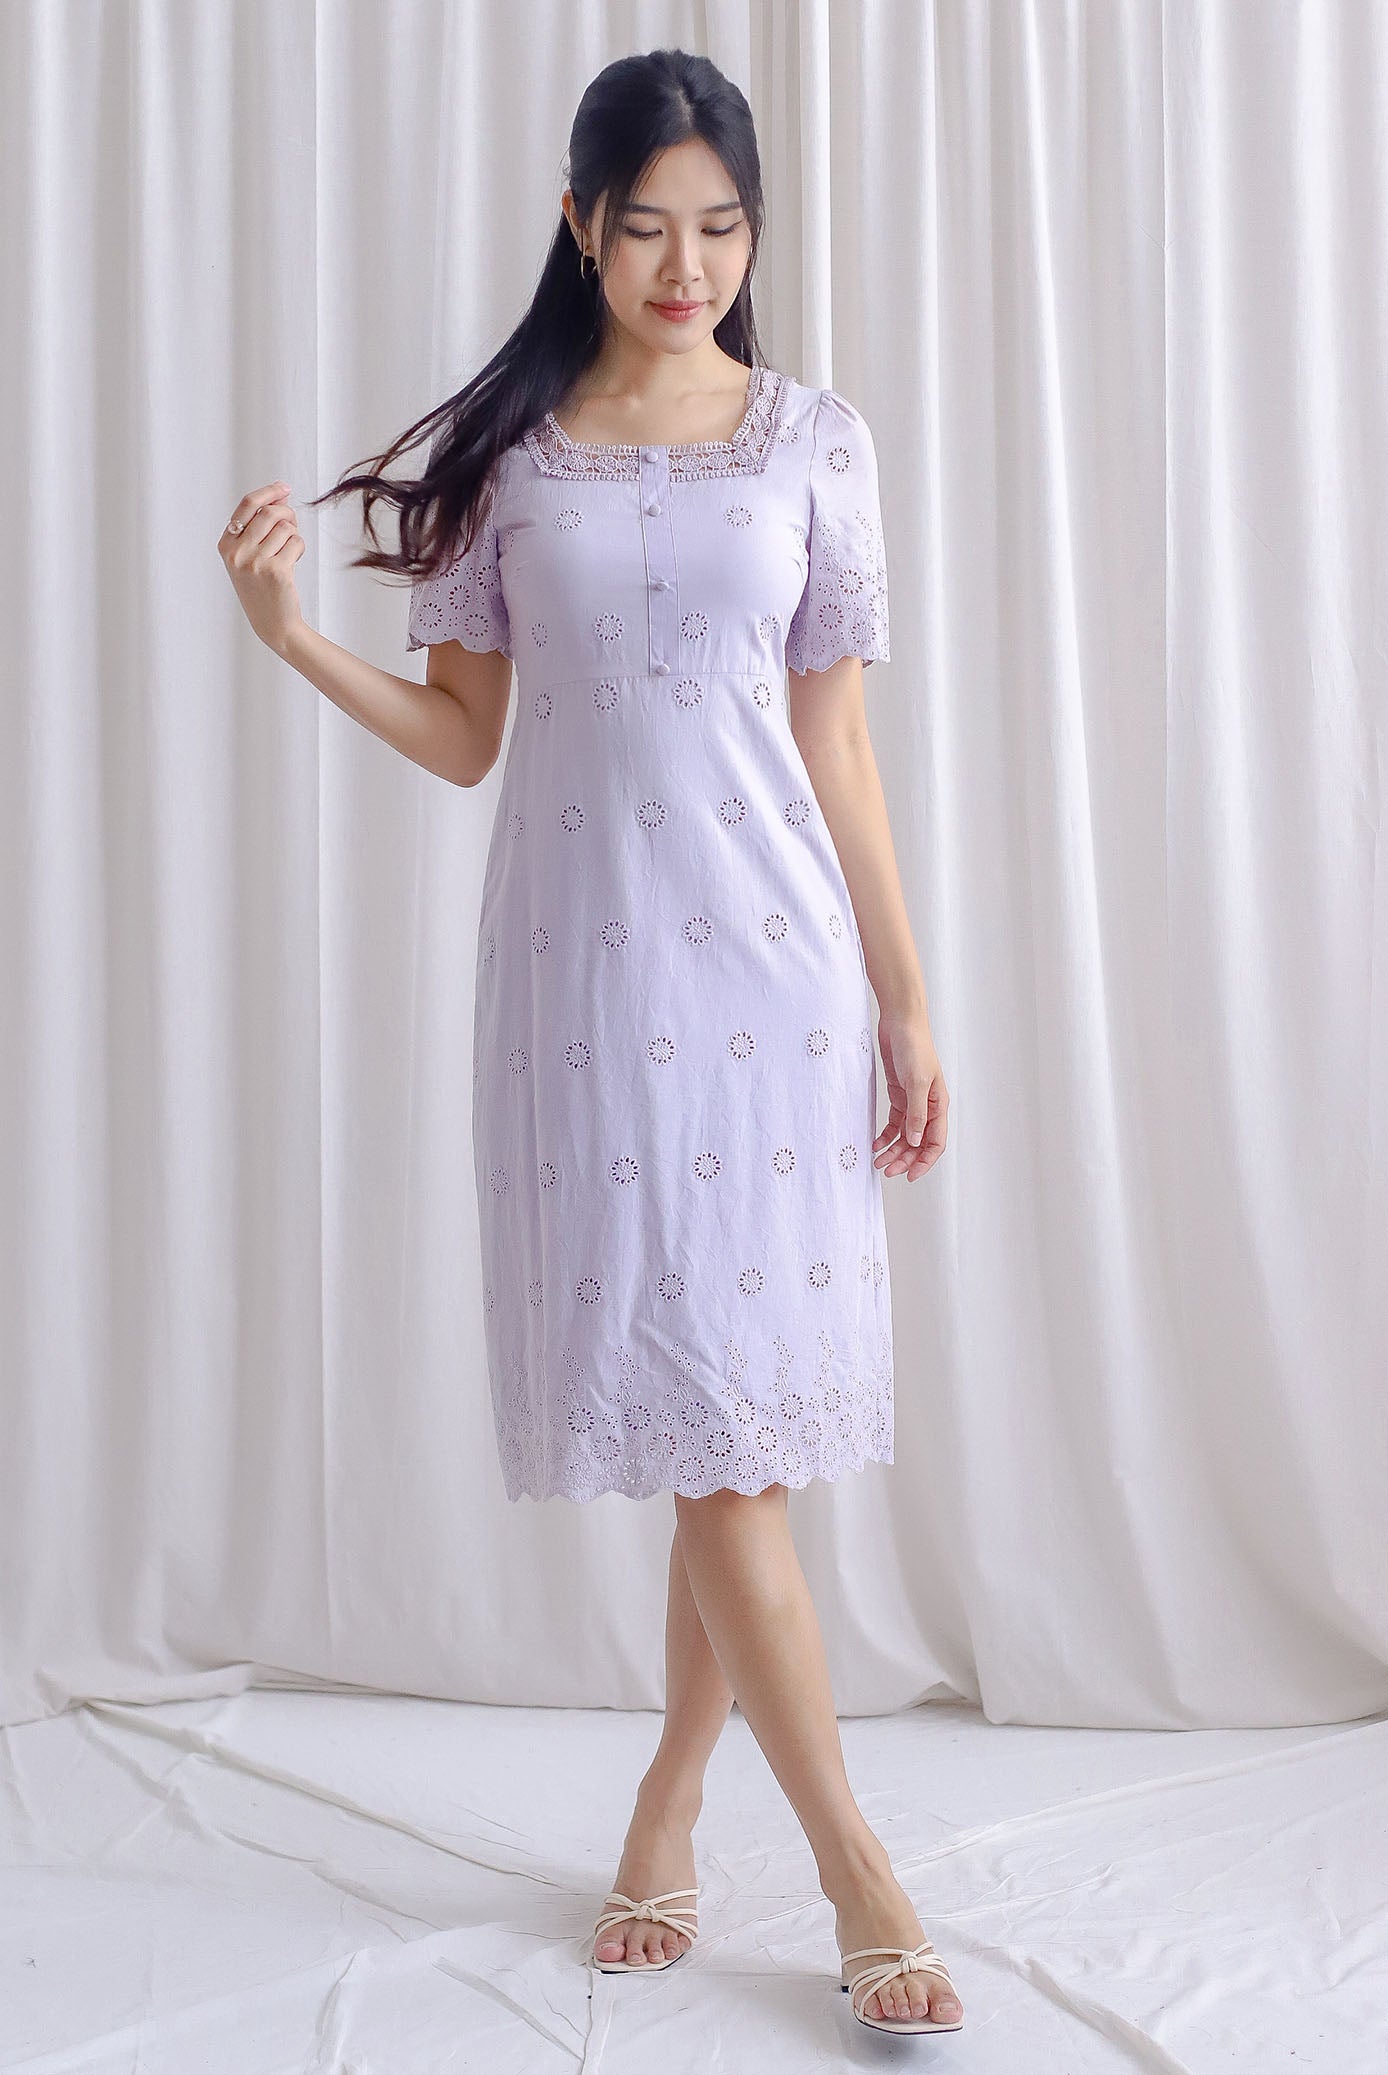 Mabelle Eyelet Square Neck Sleeve Dress In Lilac